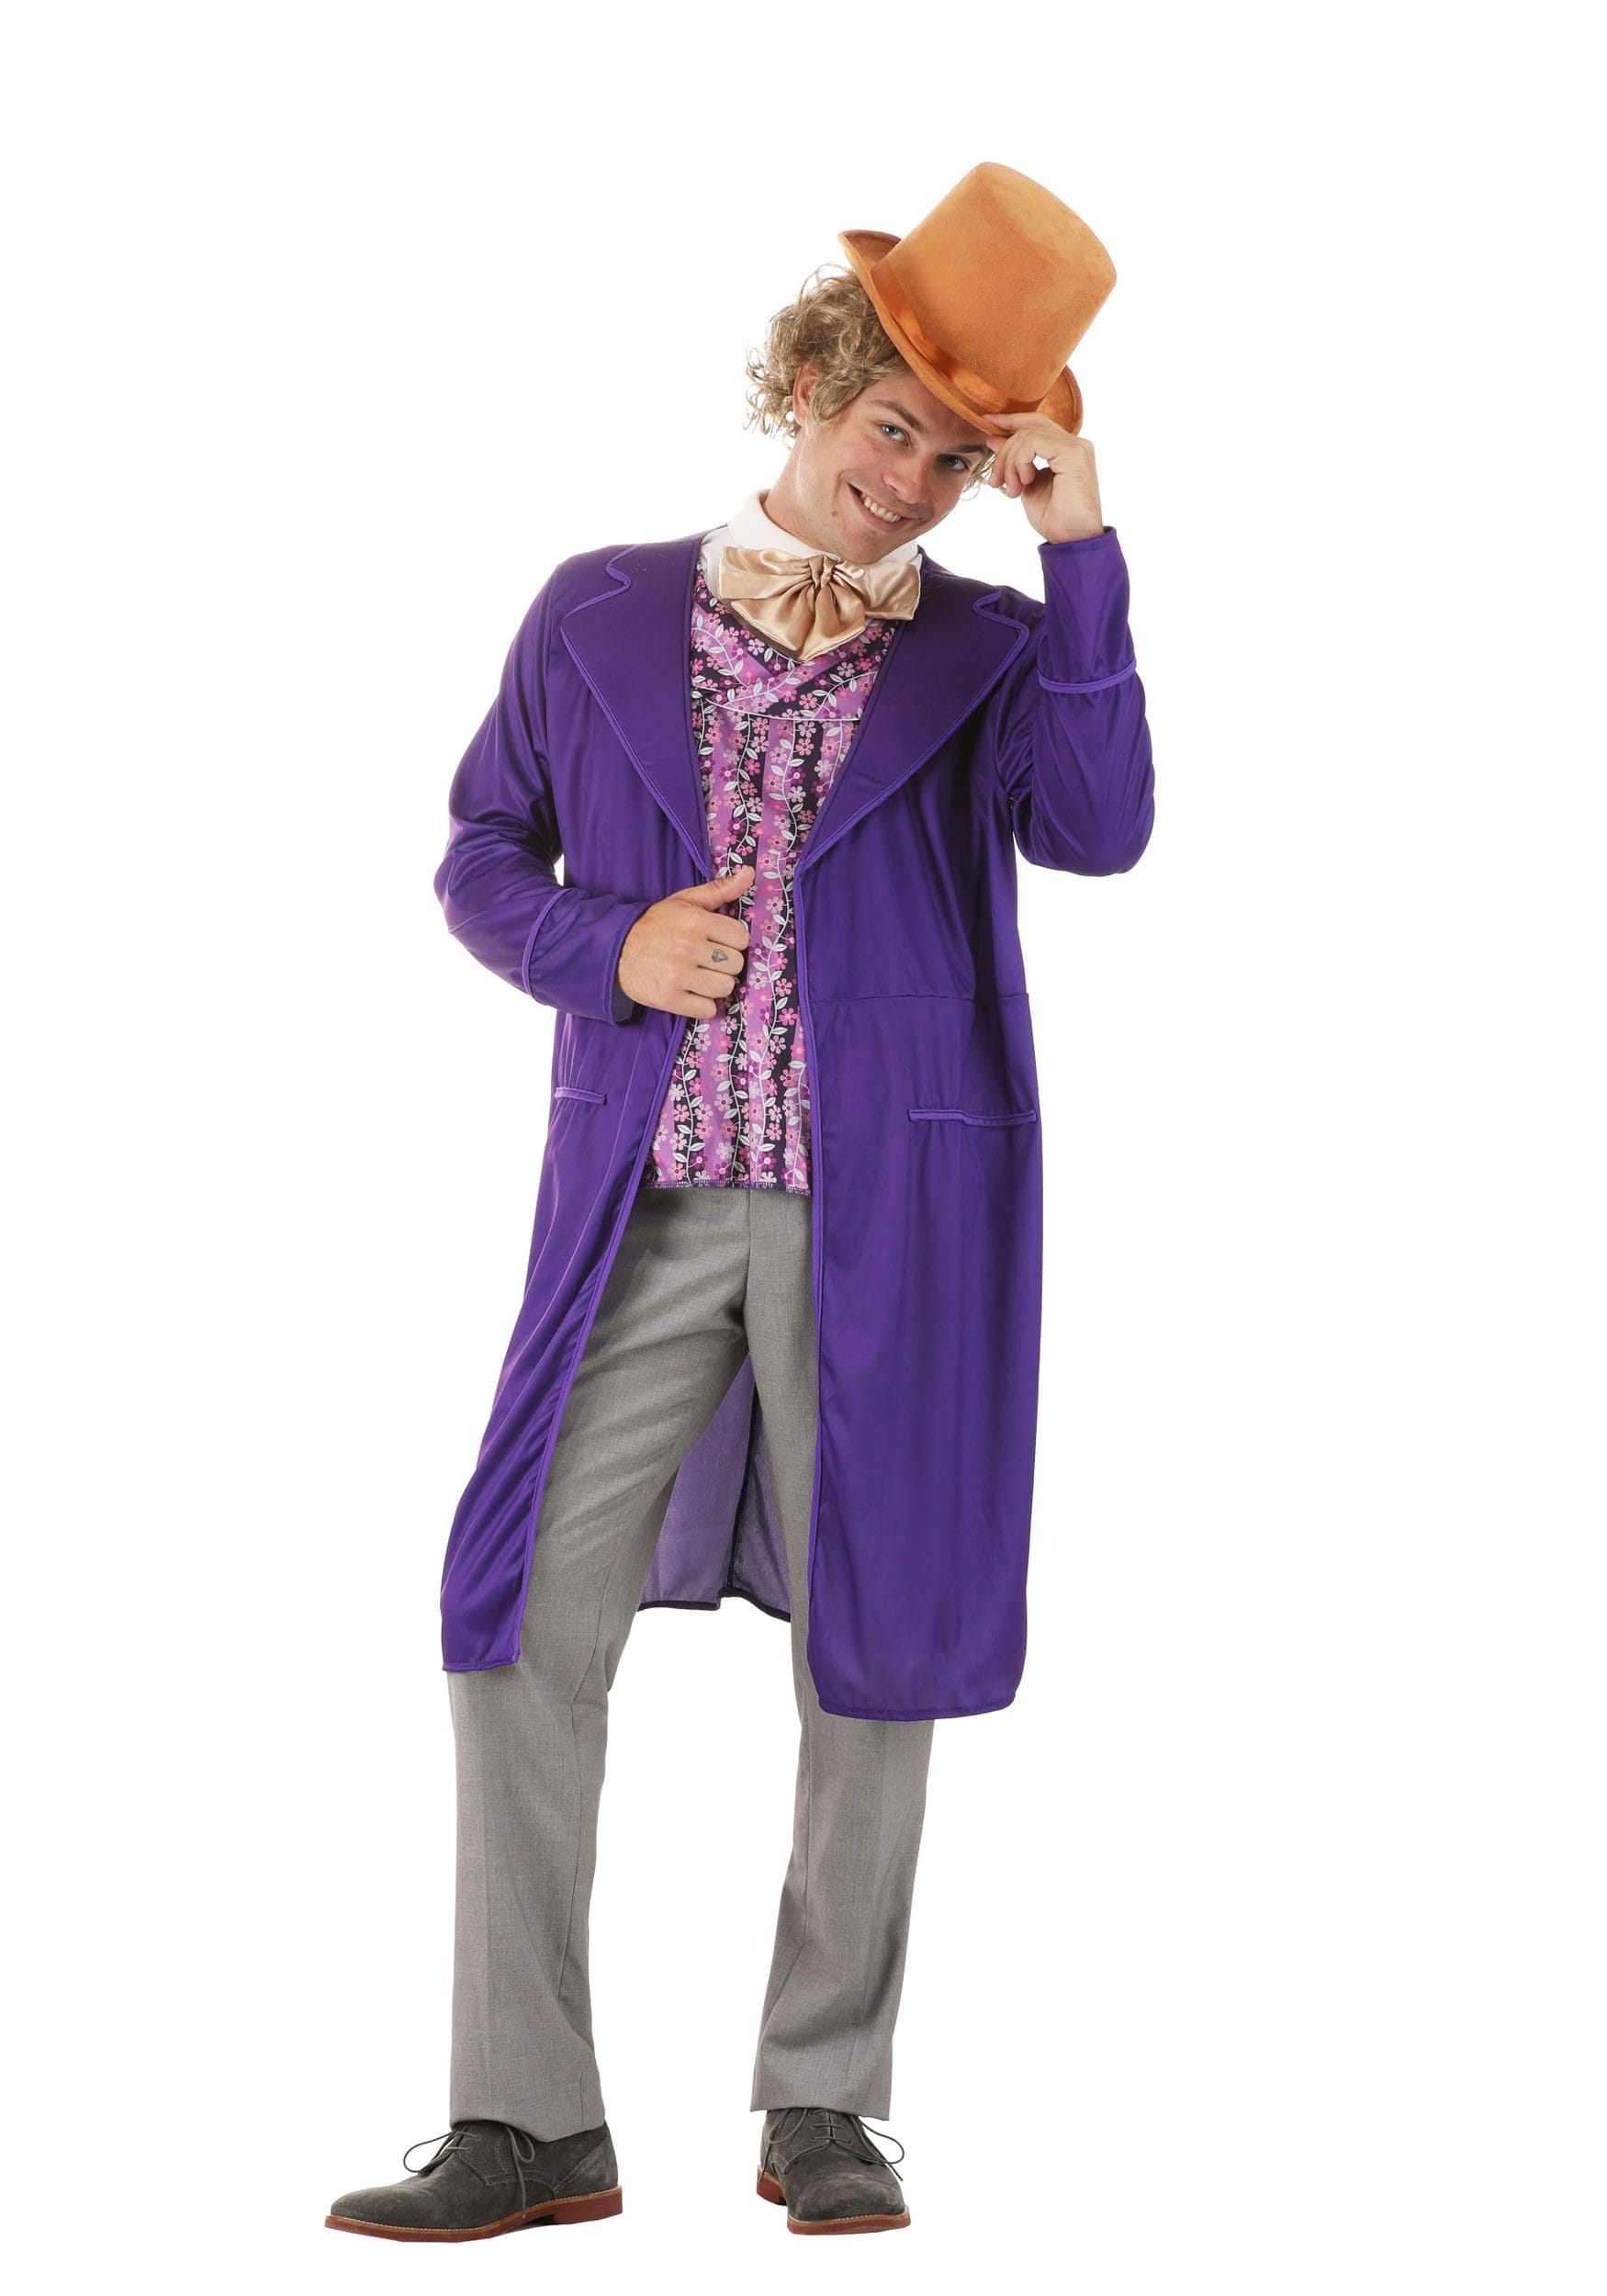 https://images.fun.co.uk/products/83547/1-1/willy-wonka-adult-costume.jpg